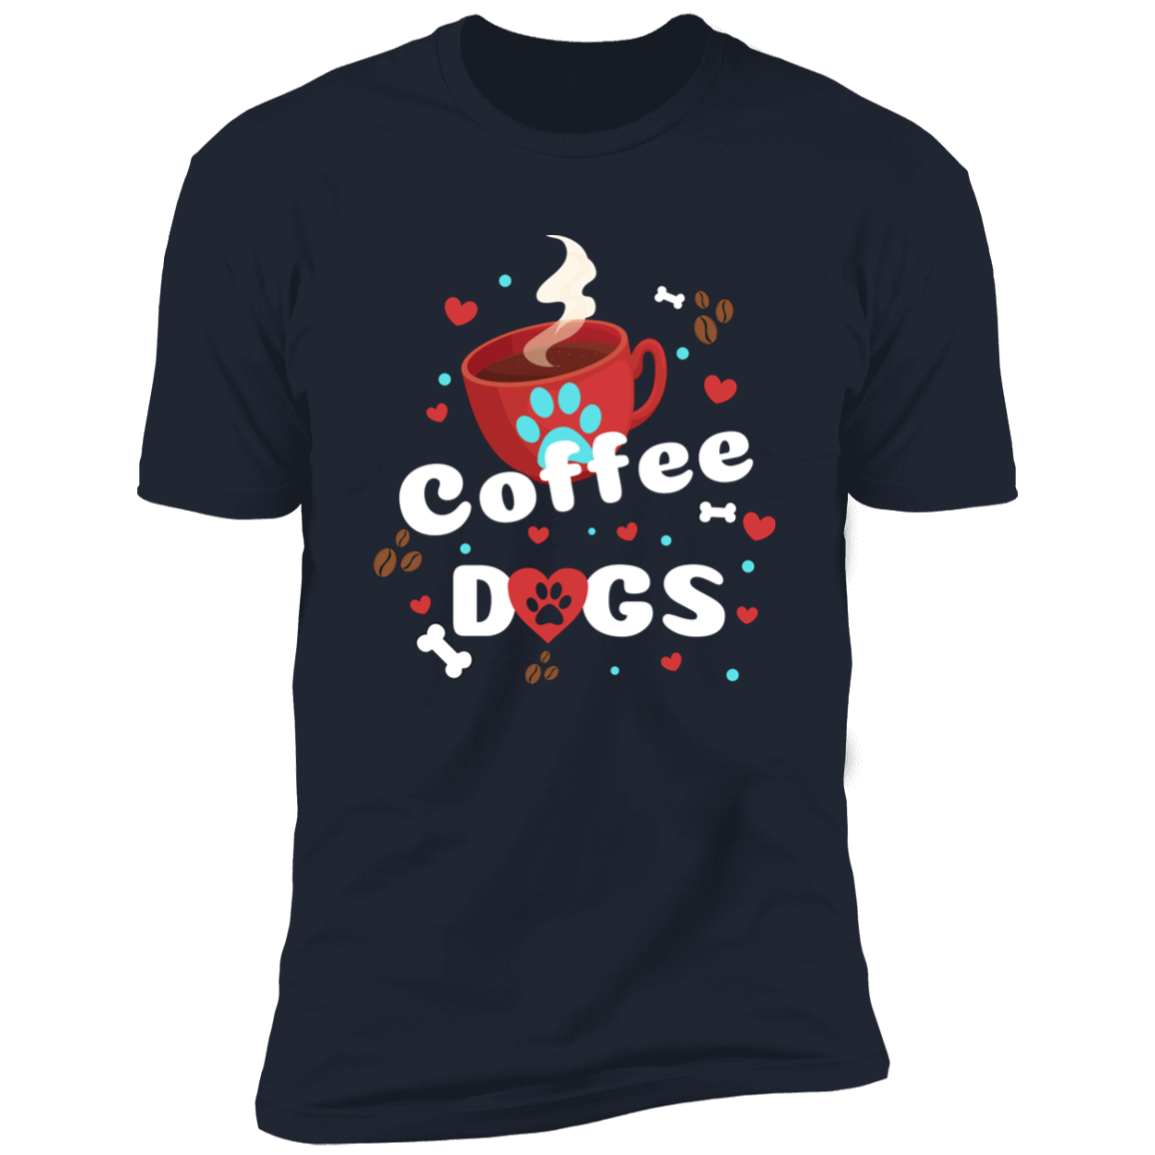 Coffee Dogs T-shirt, Dog Shirt for humans, in navy blue